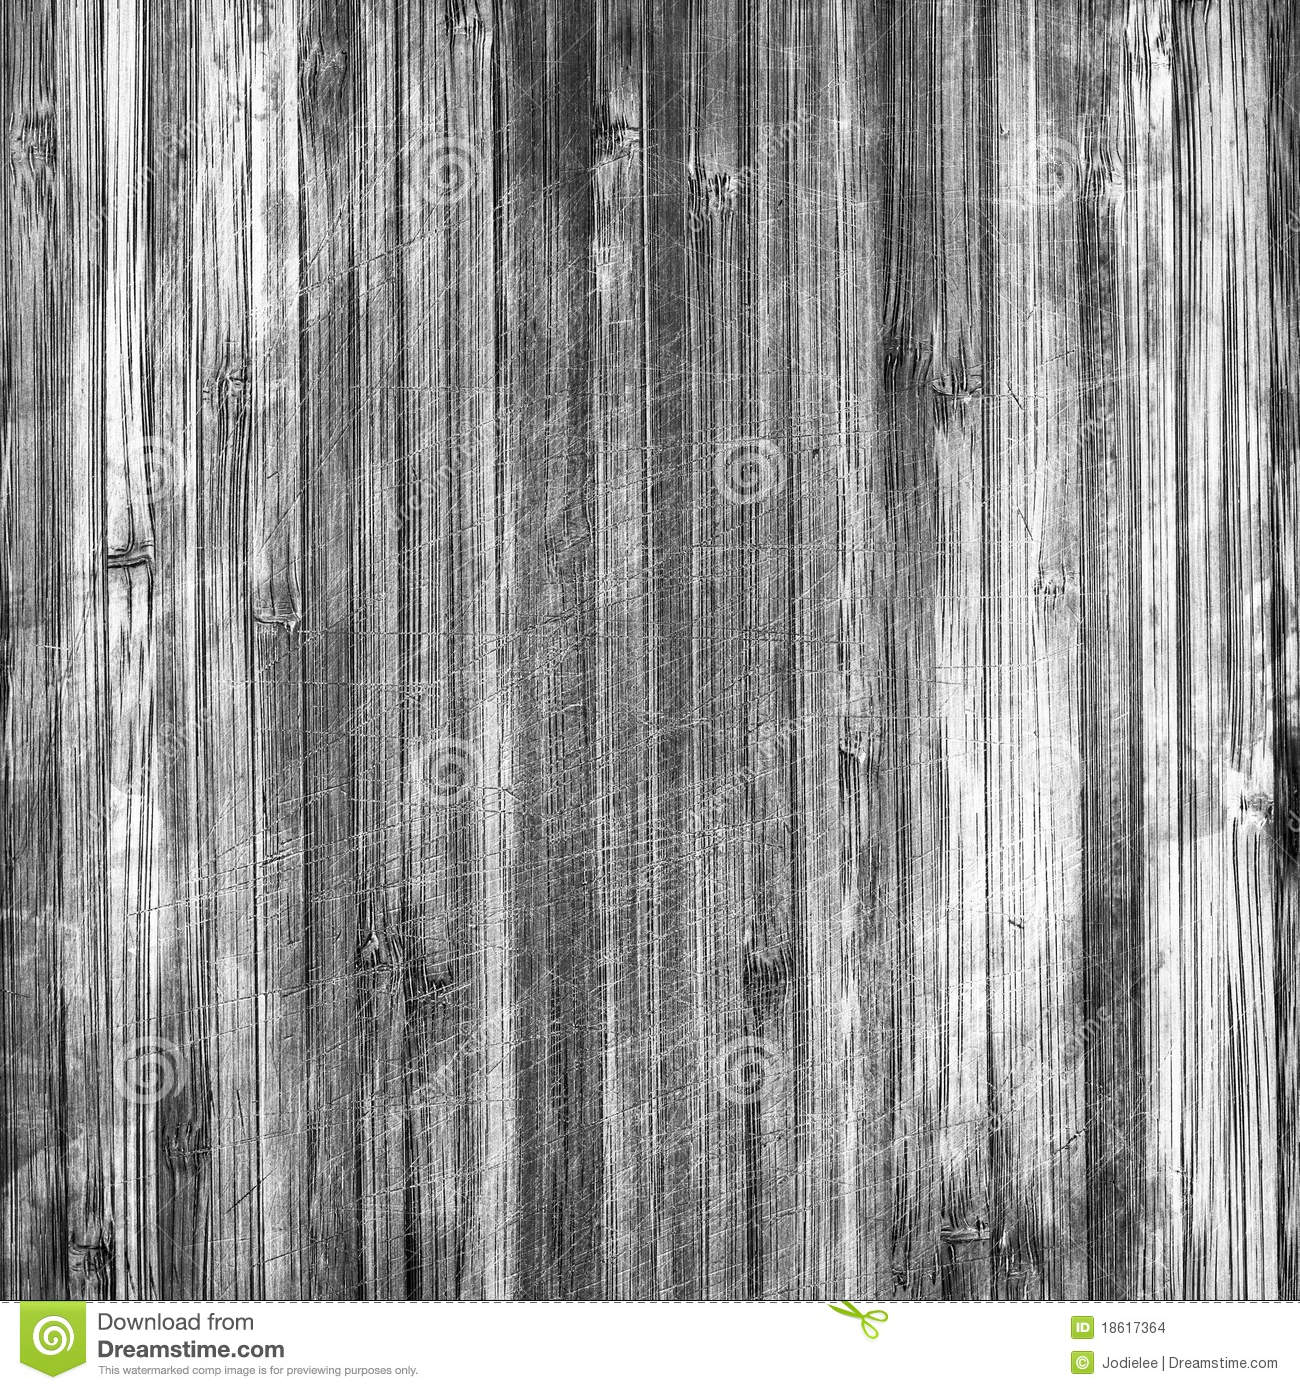 Black and White Wood Texture